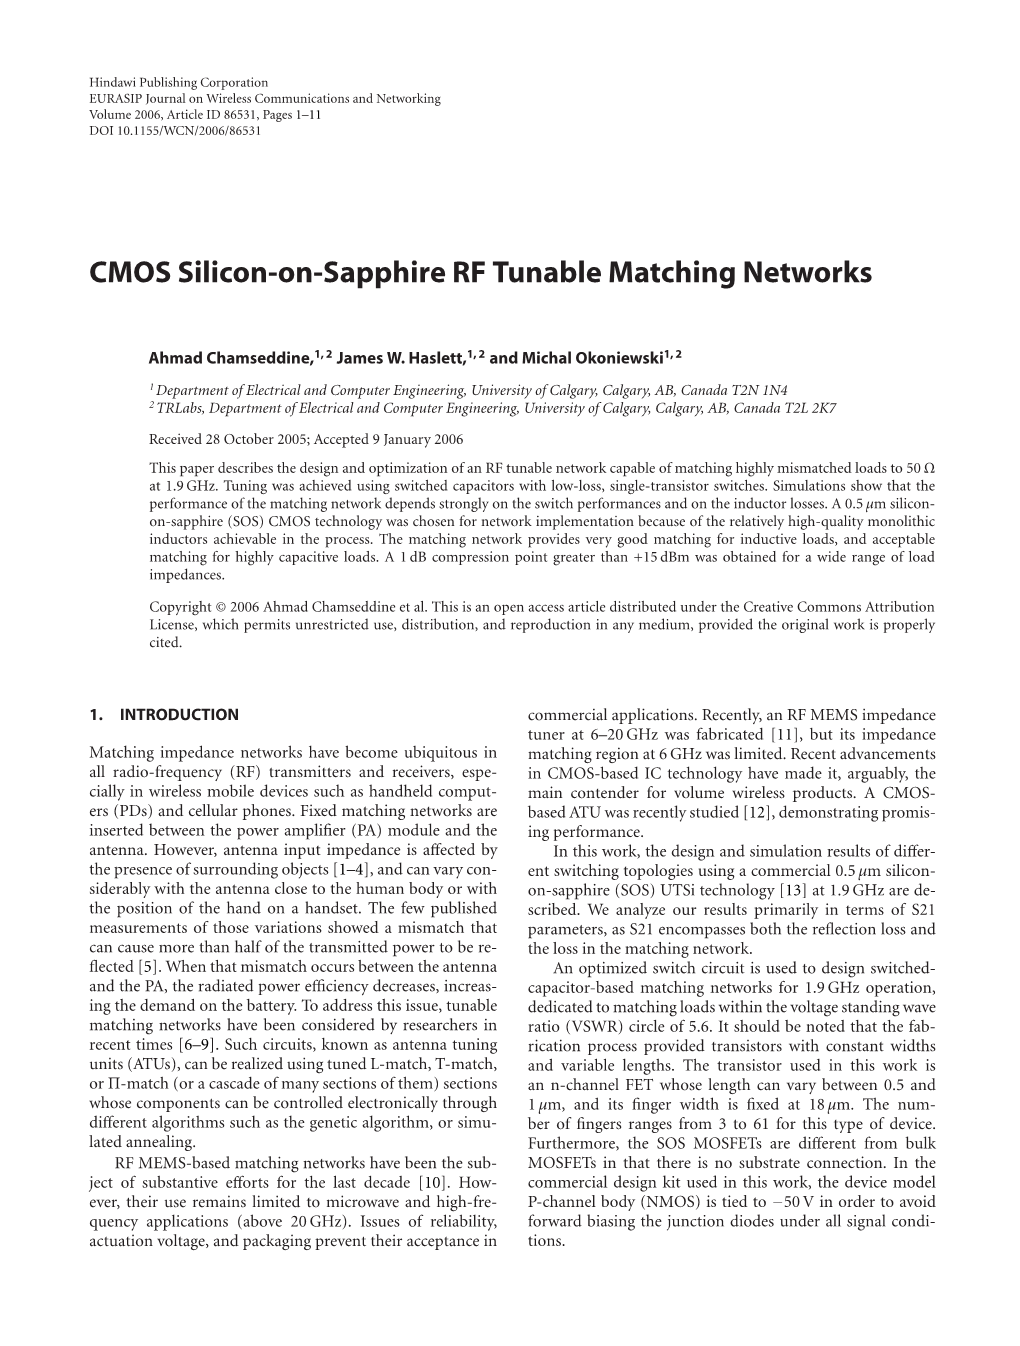 CMOS Silicon-On-Sapphire RF Tunable Matching Networks